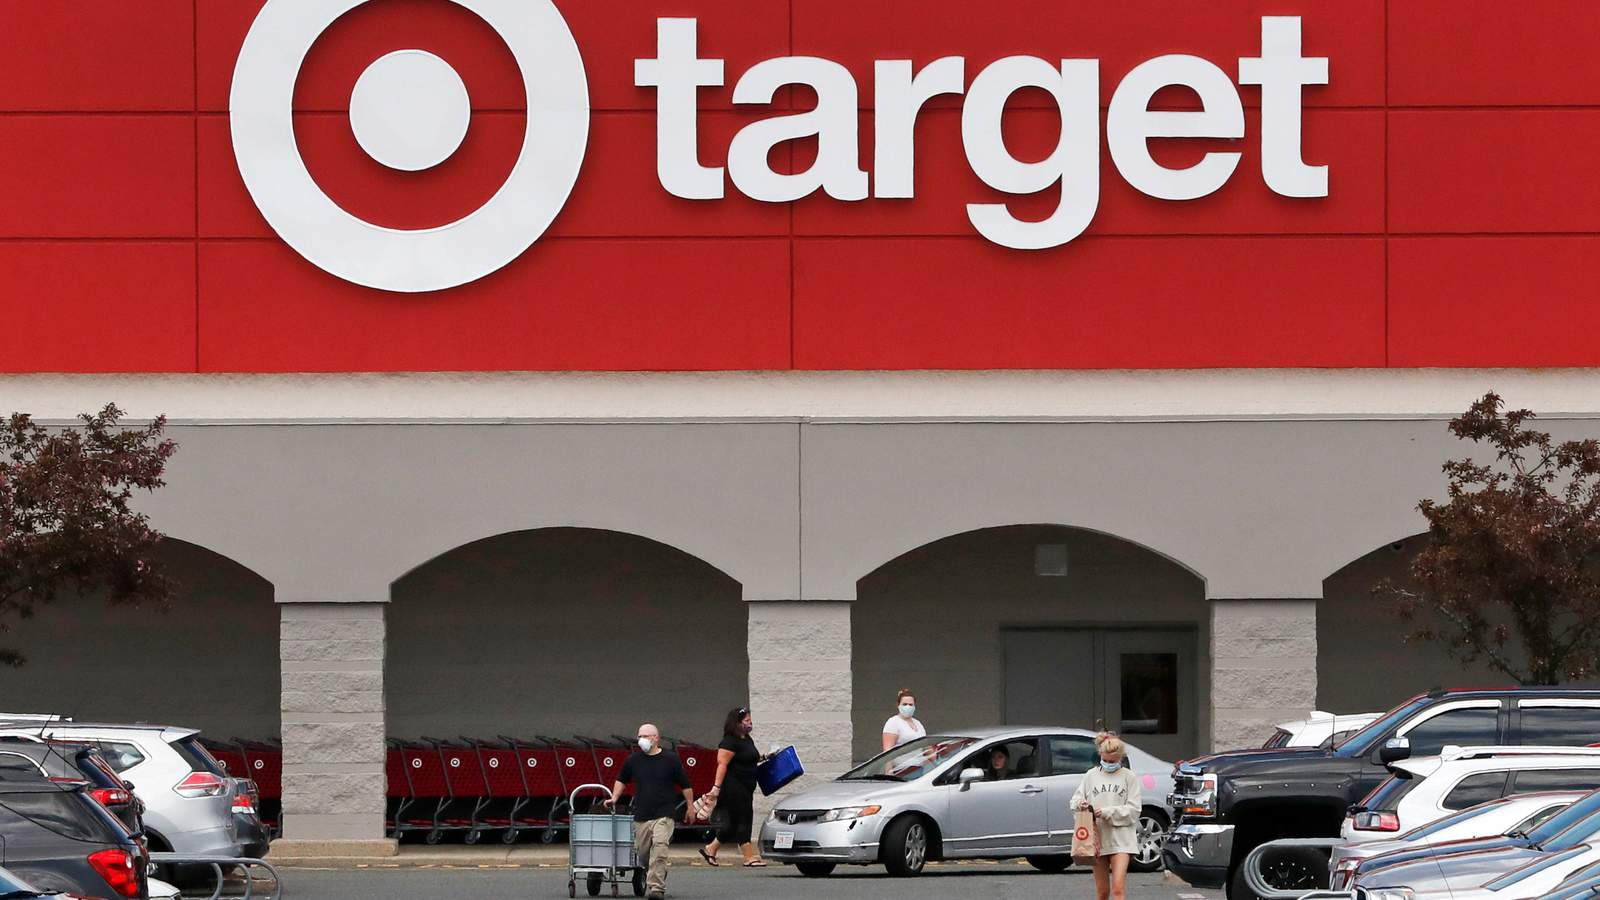 Target sets October date for annual 'Deal Days’ sales event